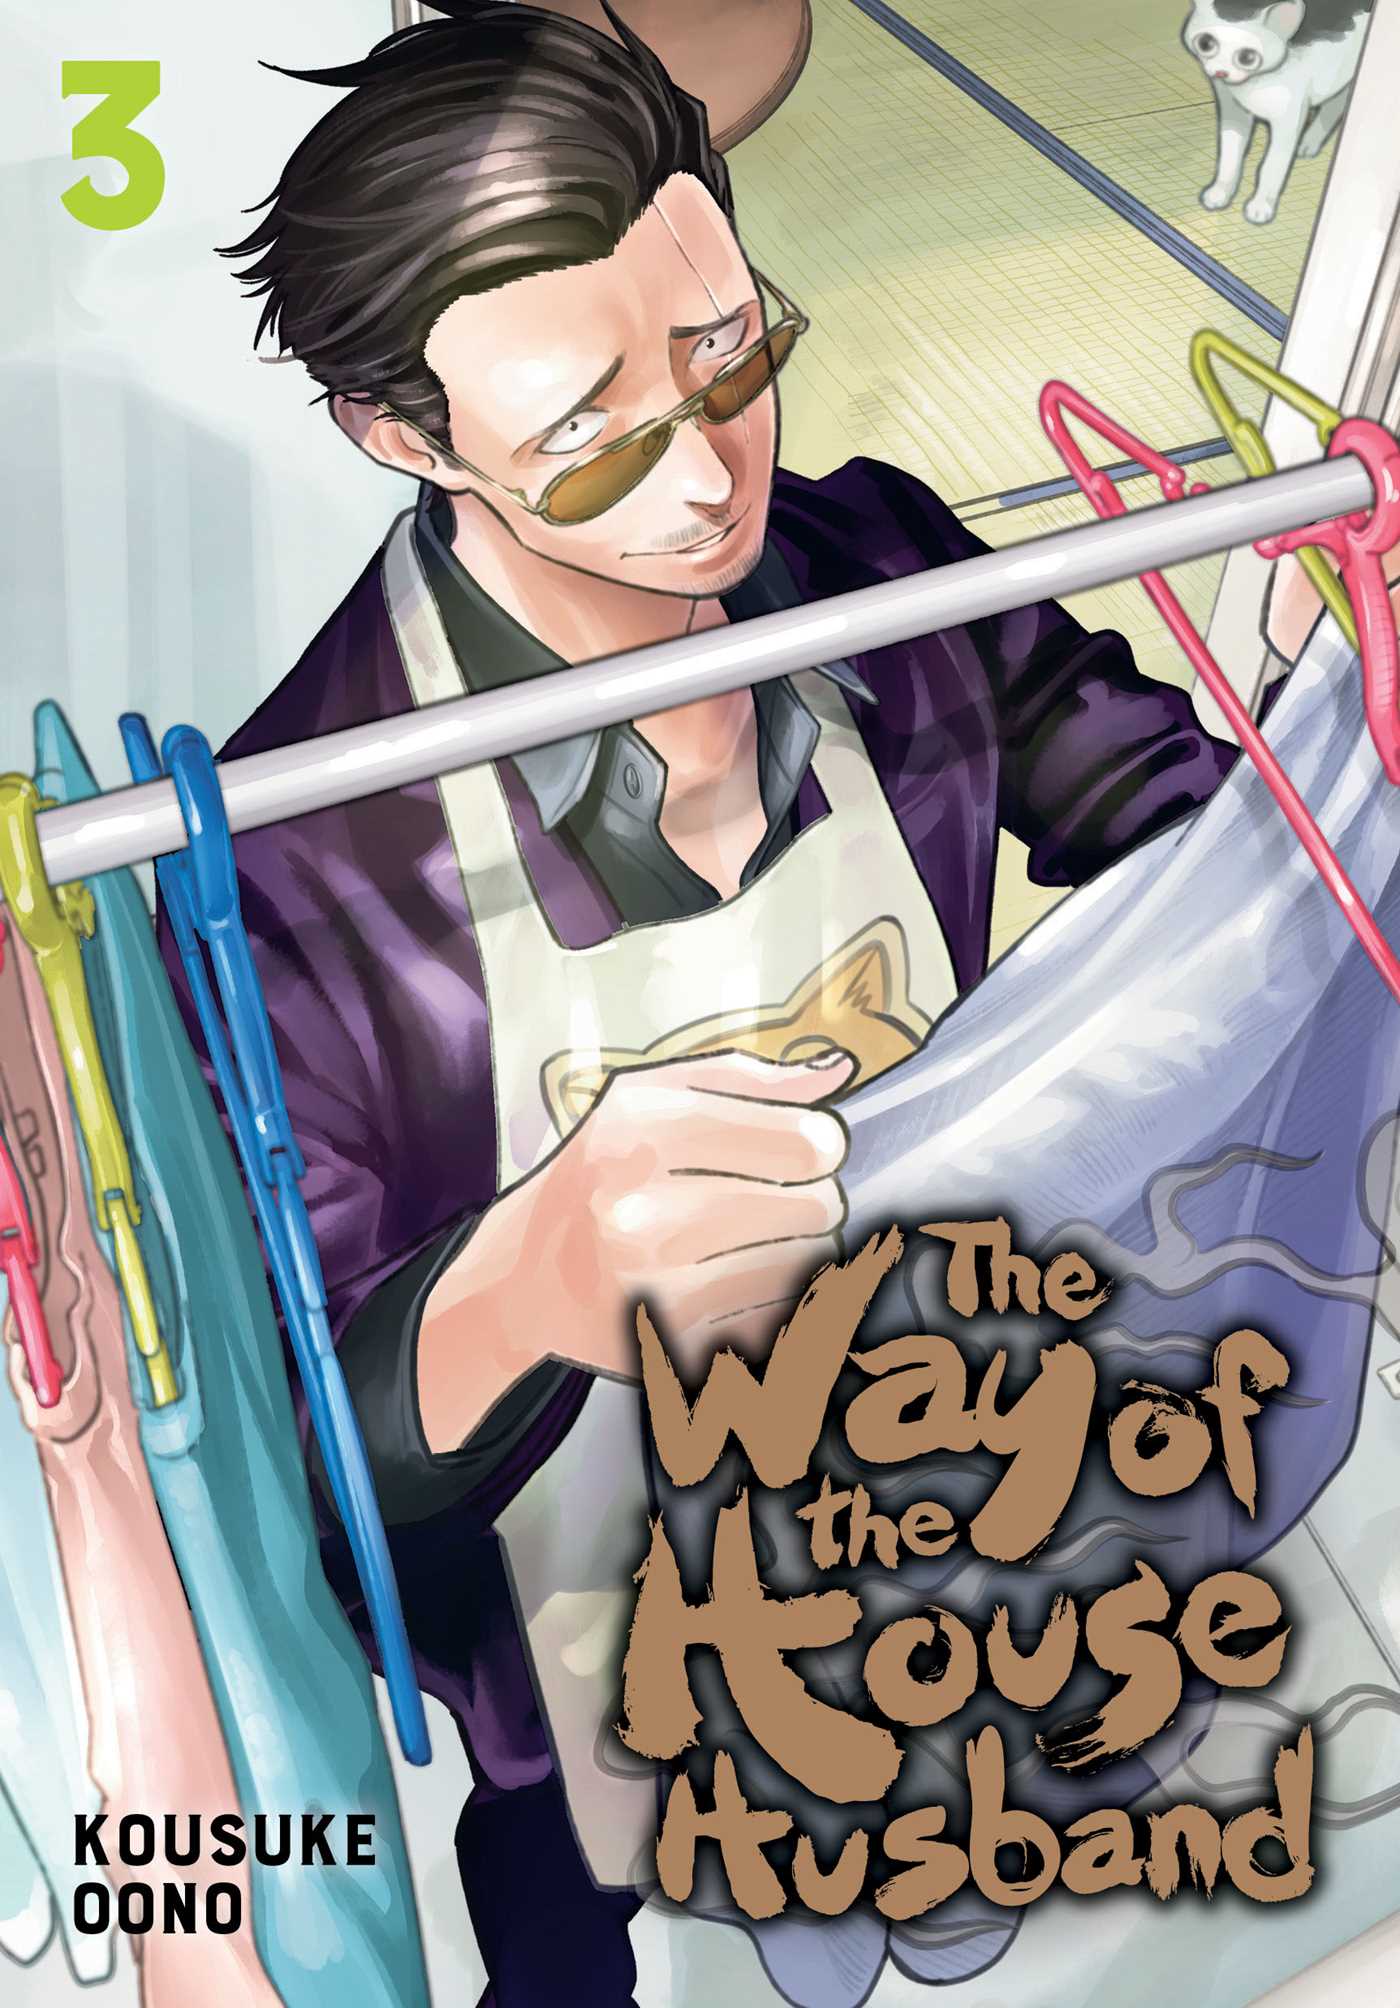 The Way of the Househusband Vol. 03